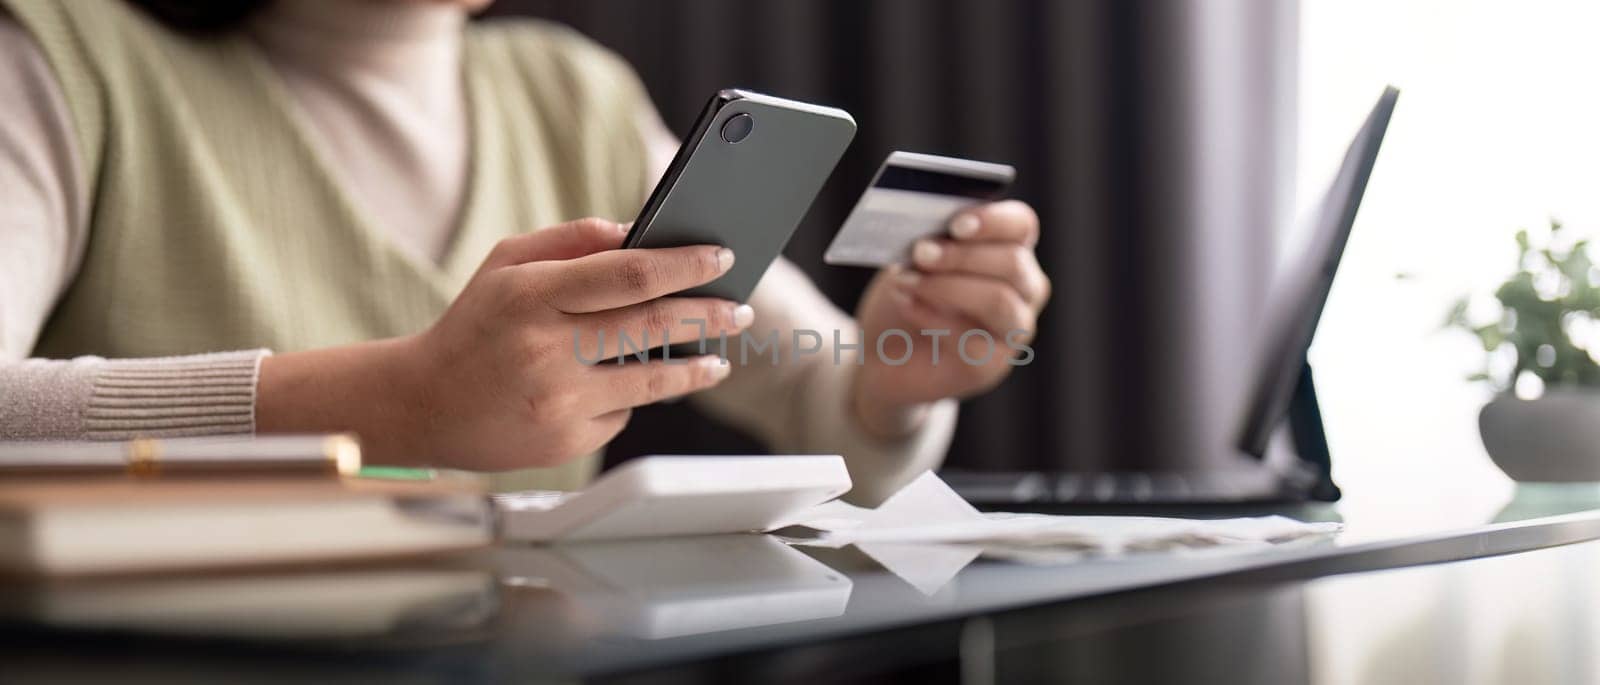 Young woman holding mobile phone and credit card sitting at the table. Happy woman makes online shopping using mobile payment. banking app service by nateemee